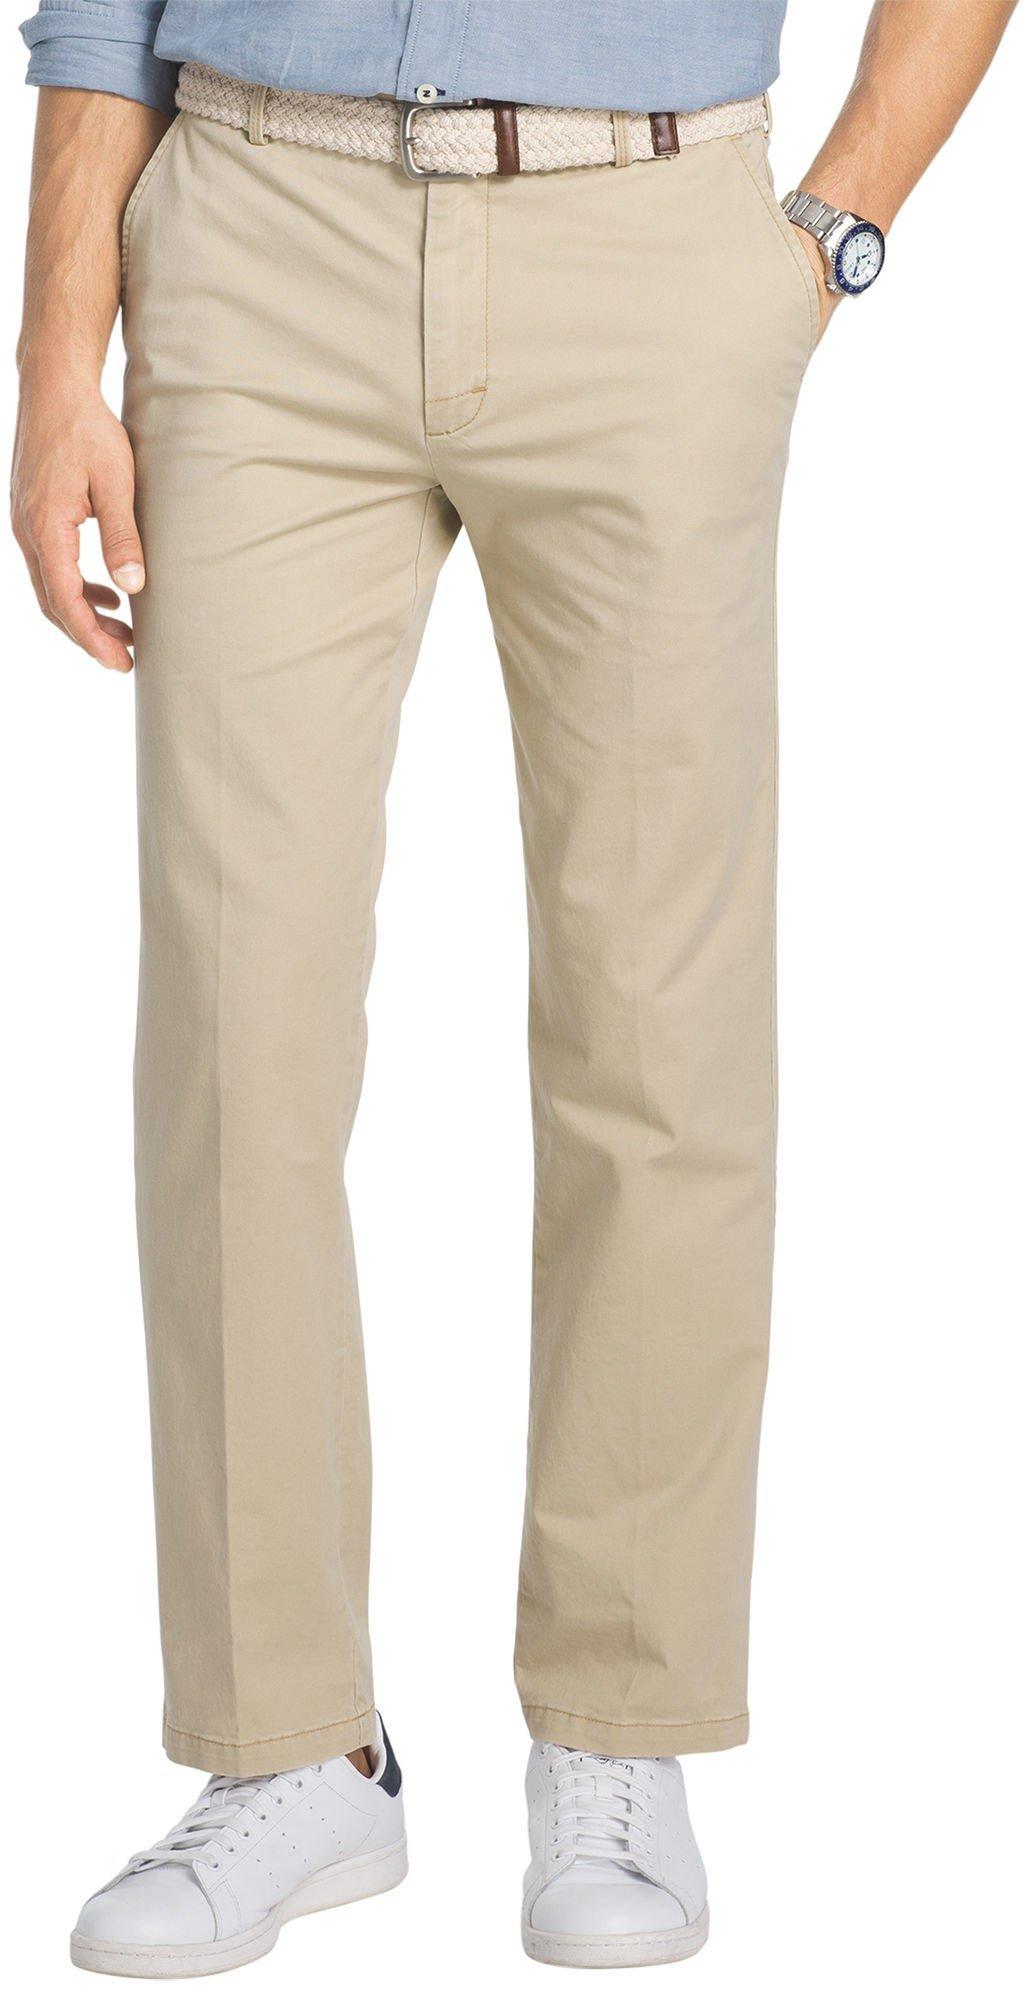 NEW MENS IZOD SALTWATER STRETCH CHINO RED STRAIGHT FIT PANTS SIZE 40 38 32 36 